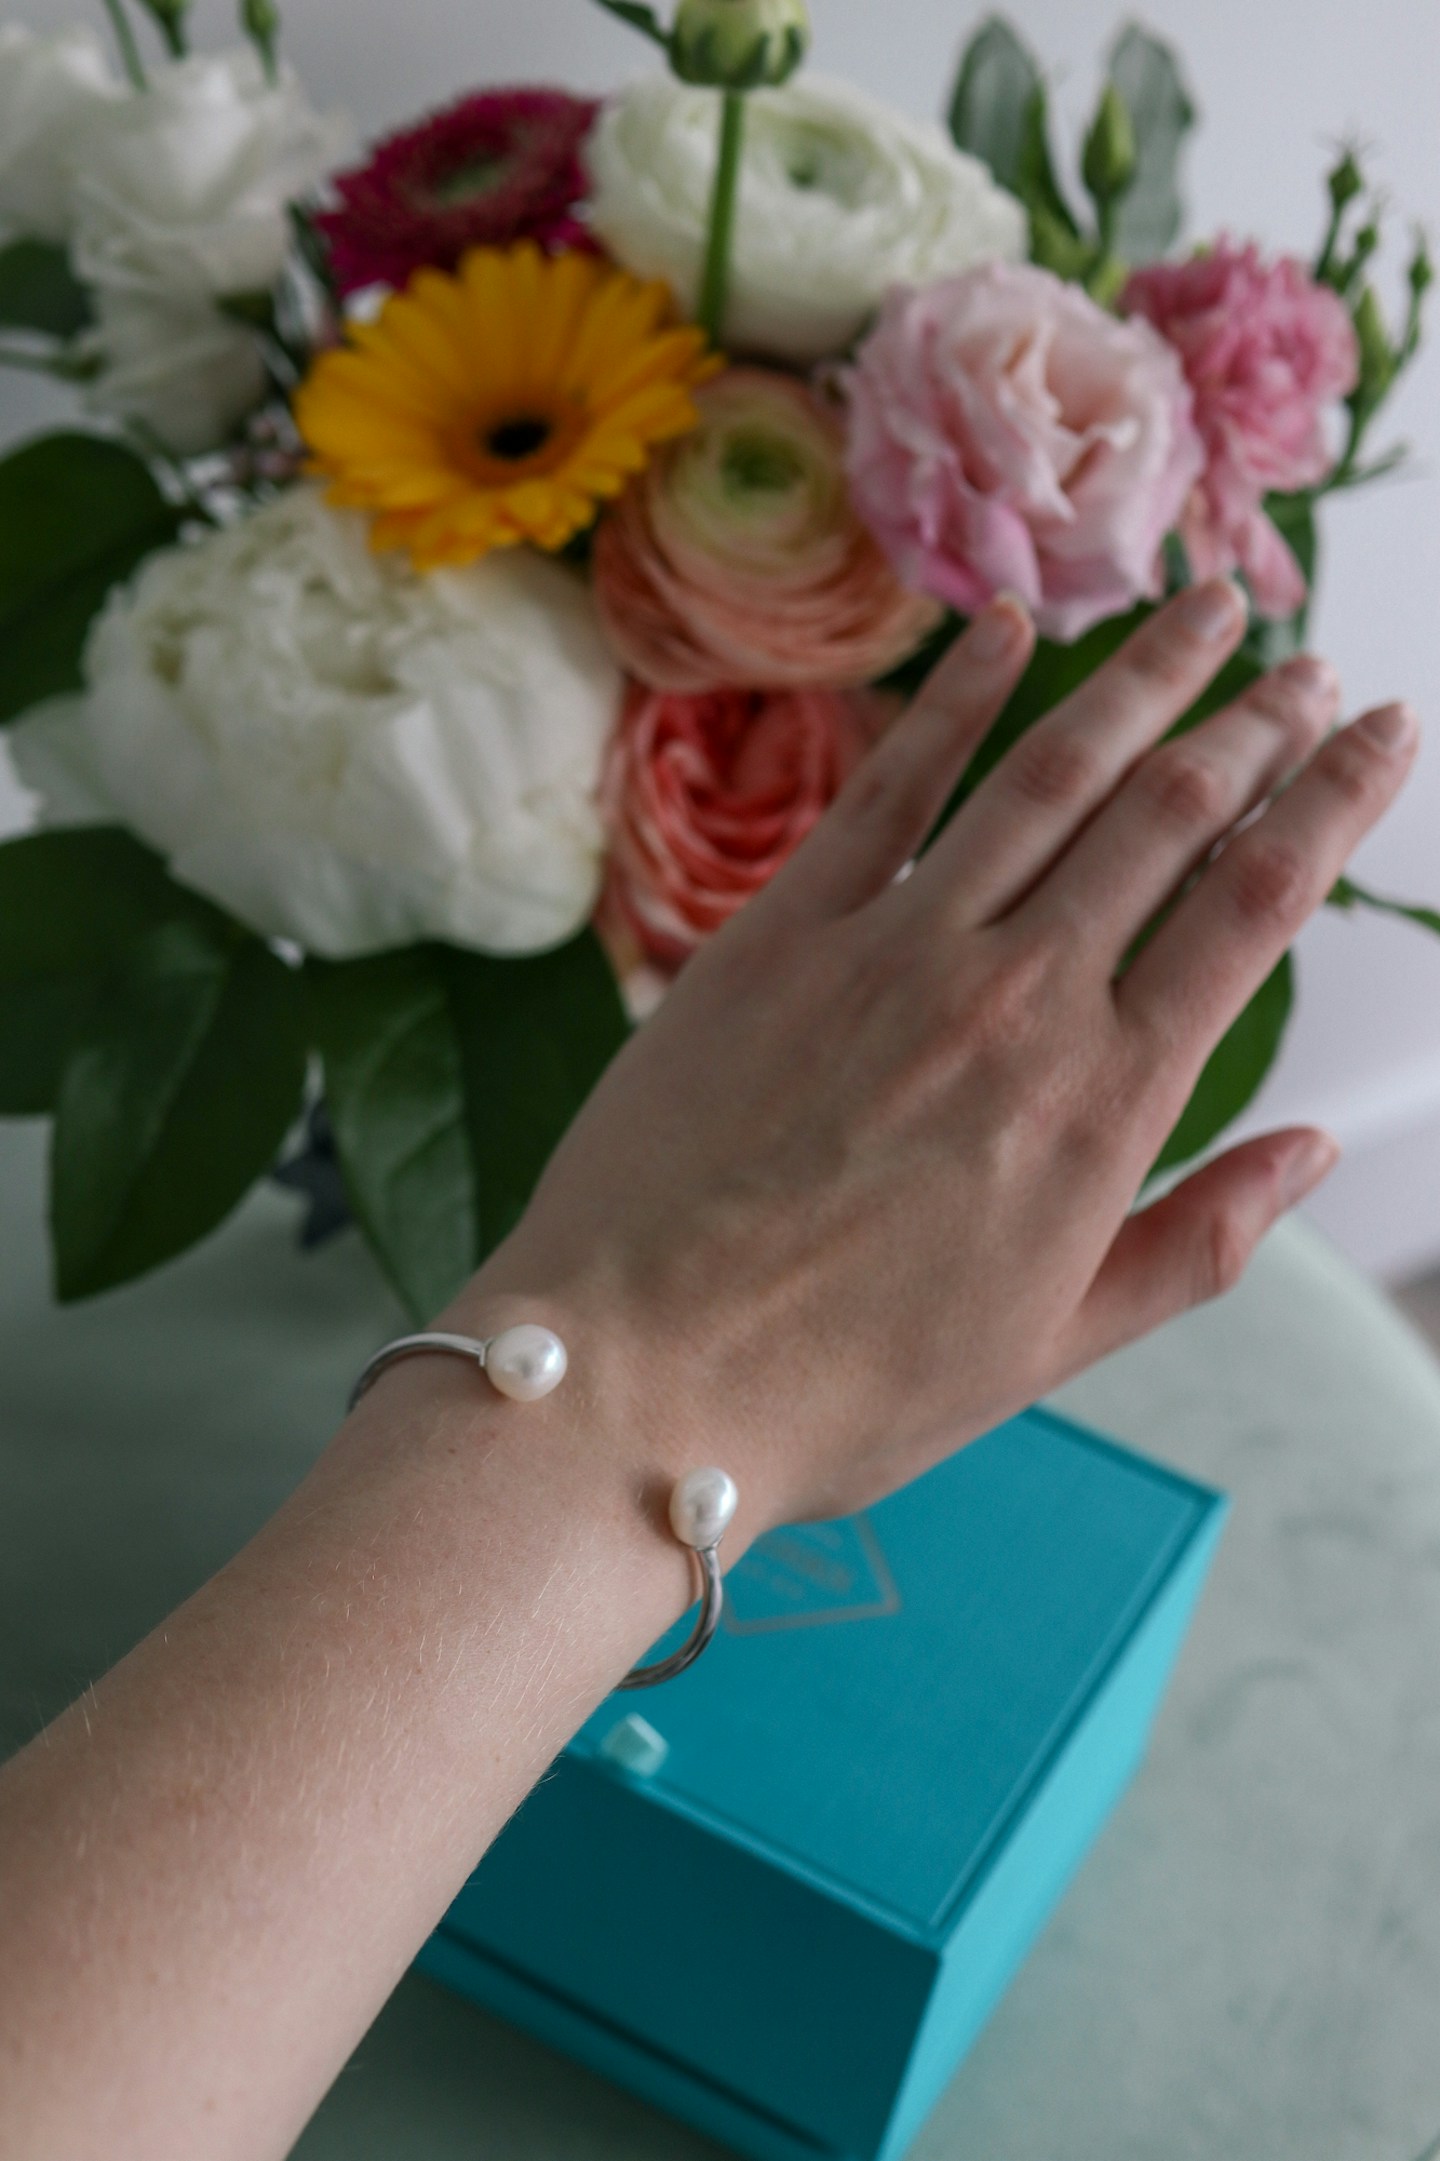 Birks Bee Chic Baroque Pearl silver bracelet - the perfect gift idea for the modern woman! Elegant, minimal but still makes a statement with freshwater pearls and silver.